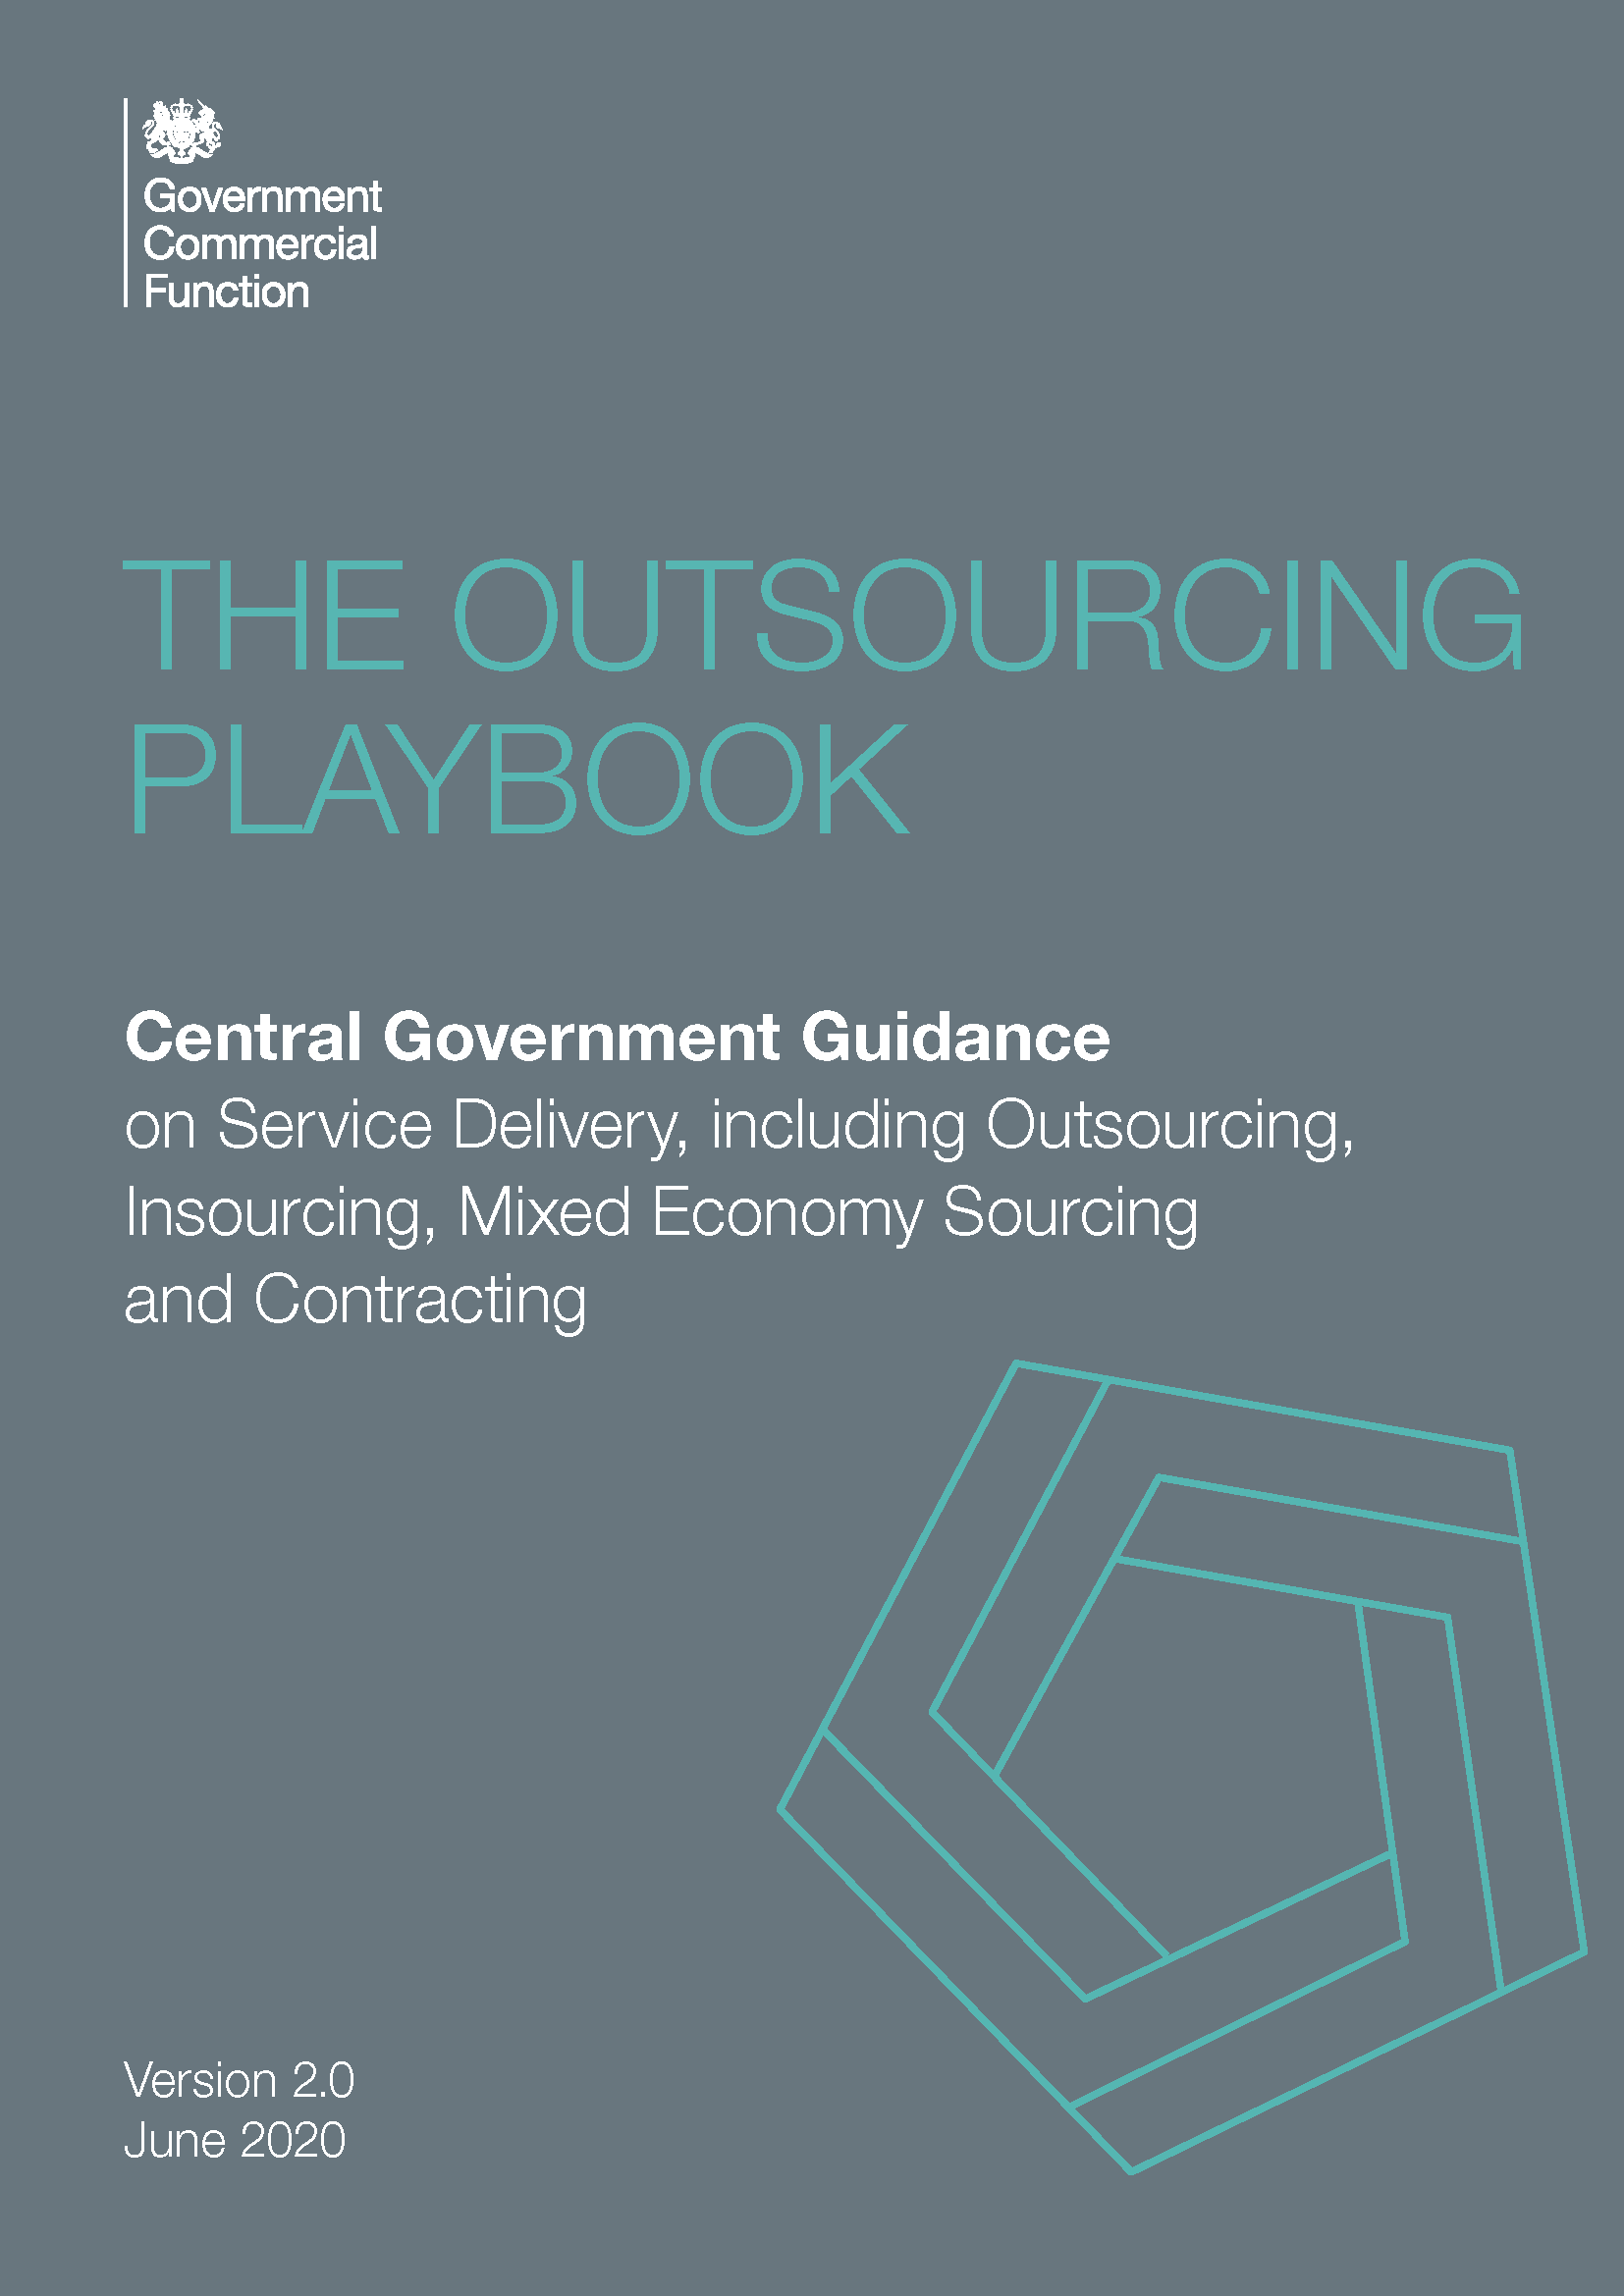 The Outsourcing Playbook